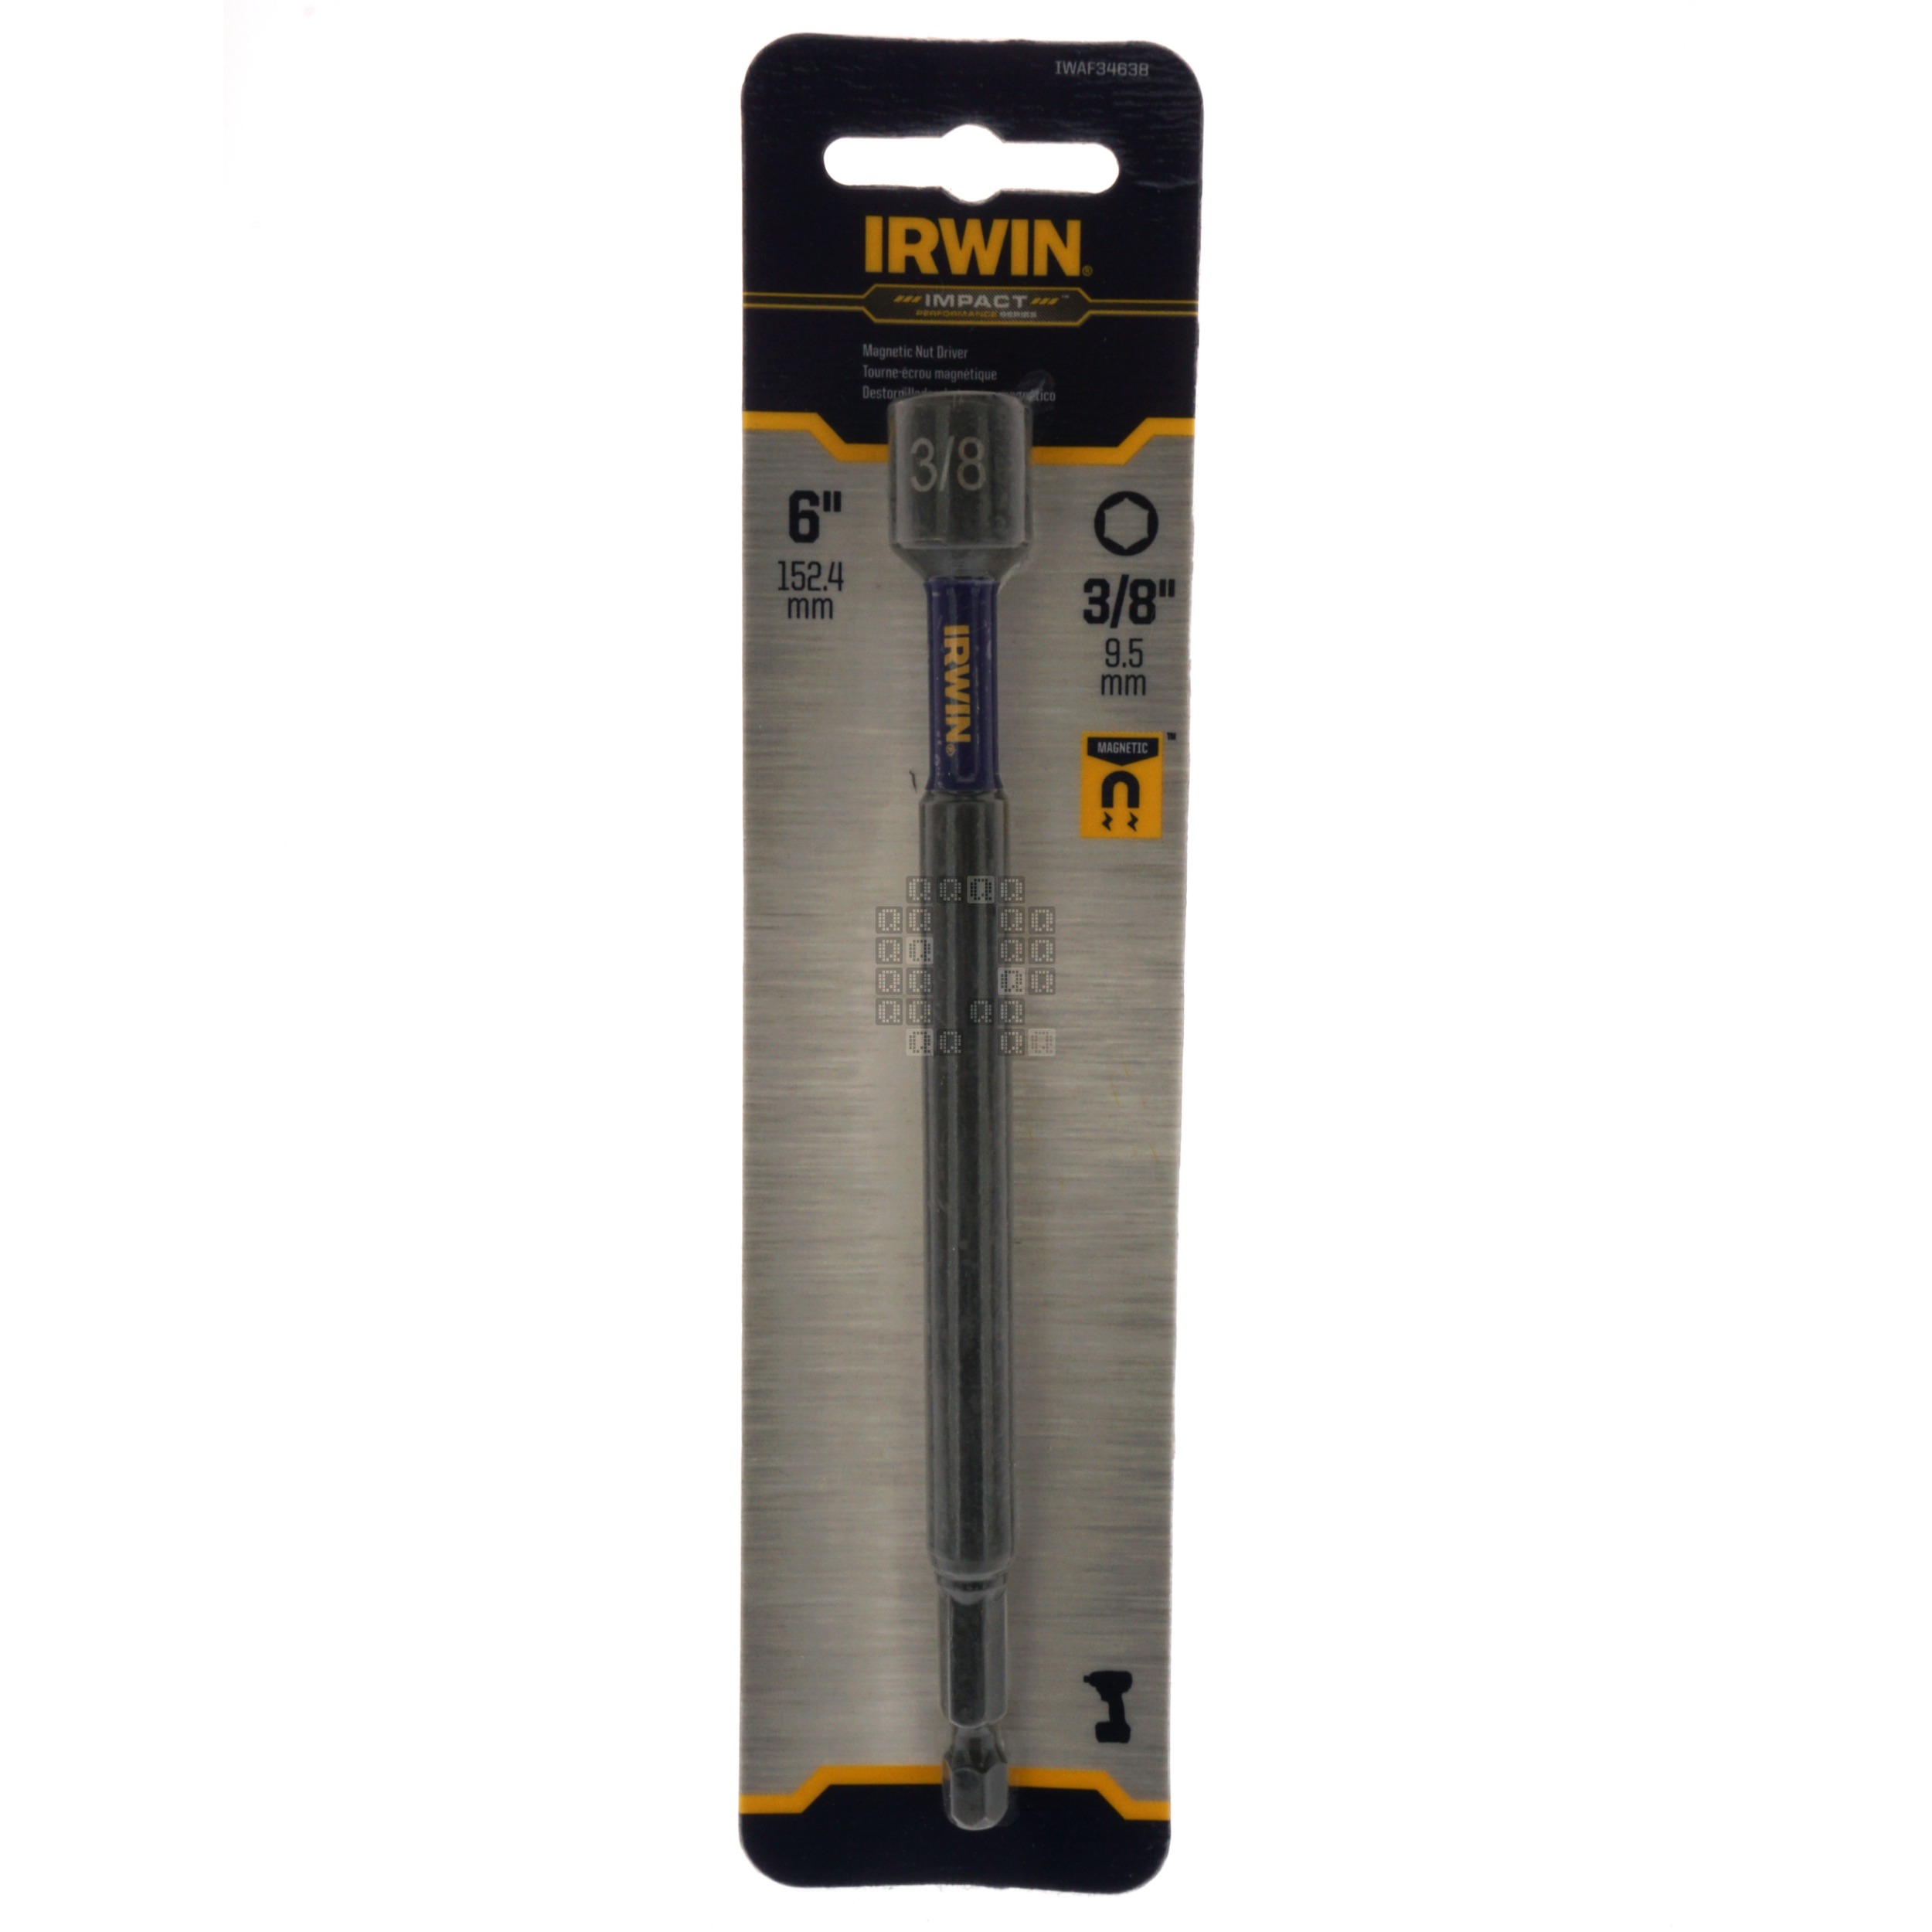 IRWIN IWAF34638 1/4" Hex to 3/8" Magnetic Nut Driver, 6" Length